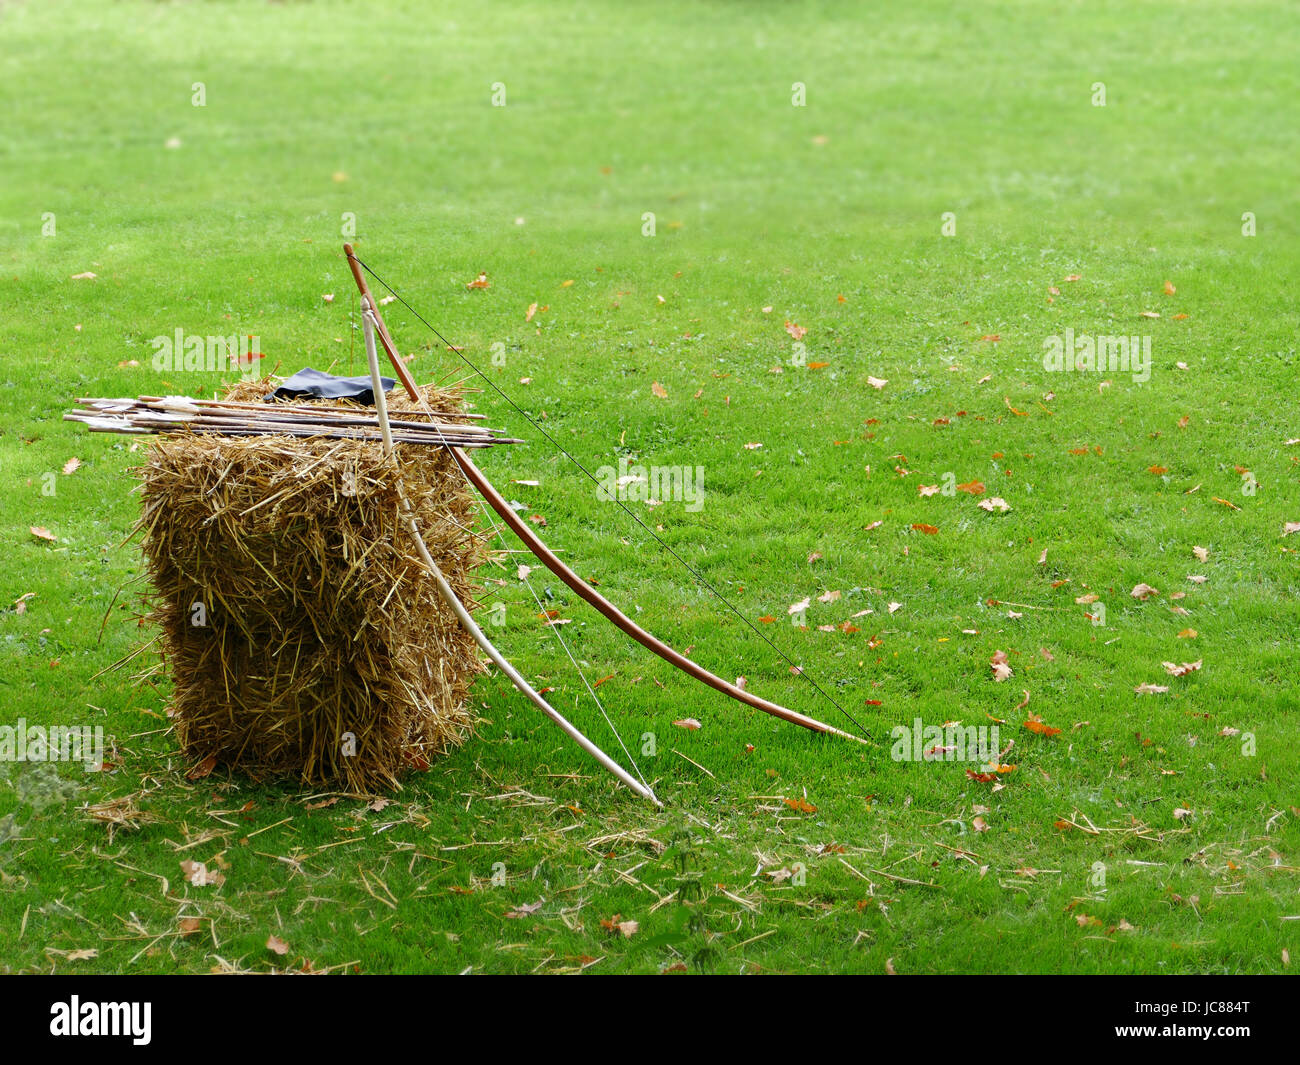 leaning bow and arrows on straw bales Stock Photo